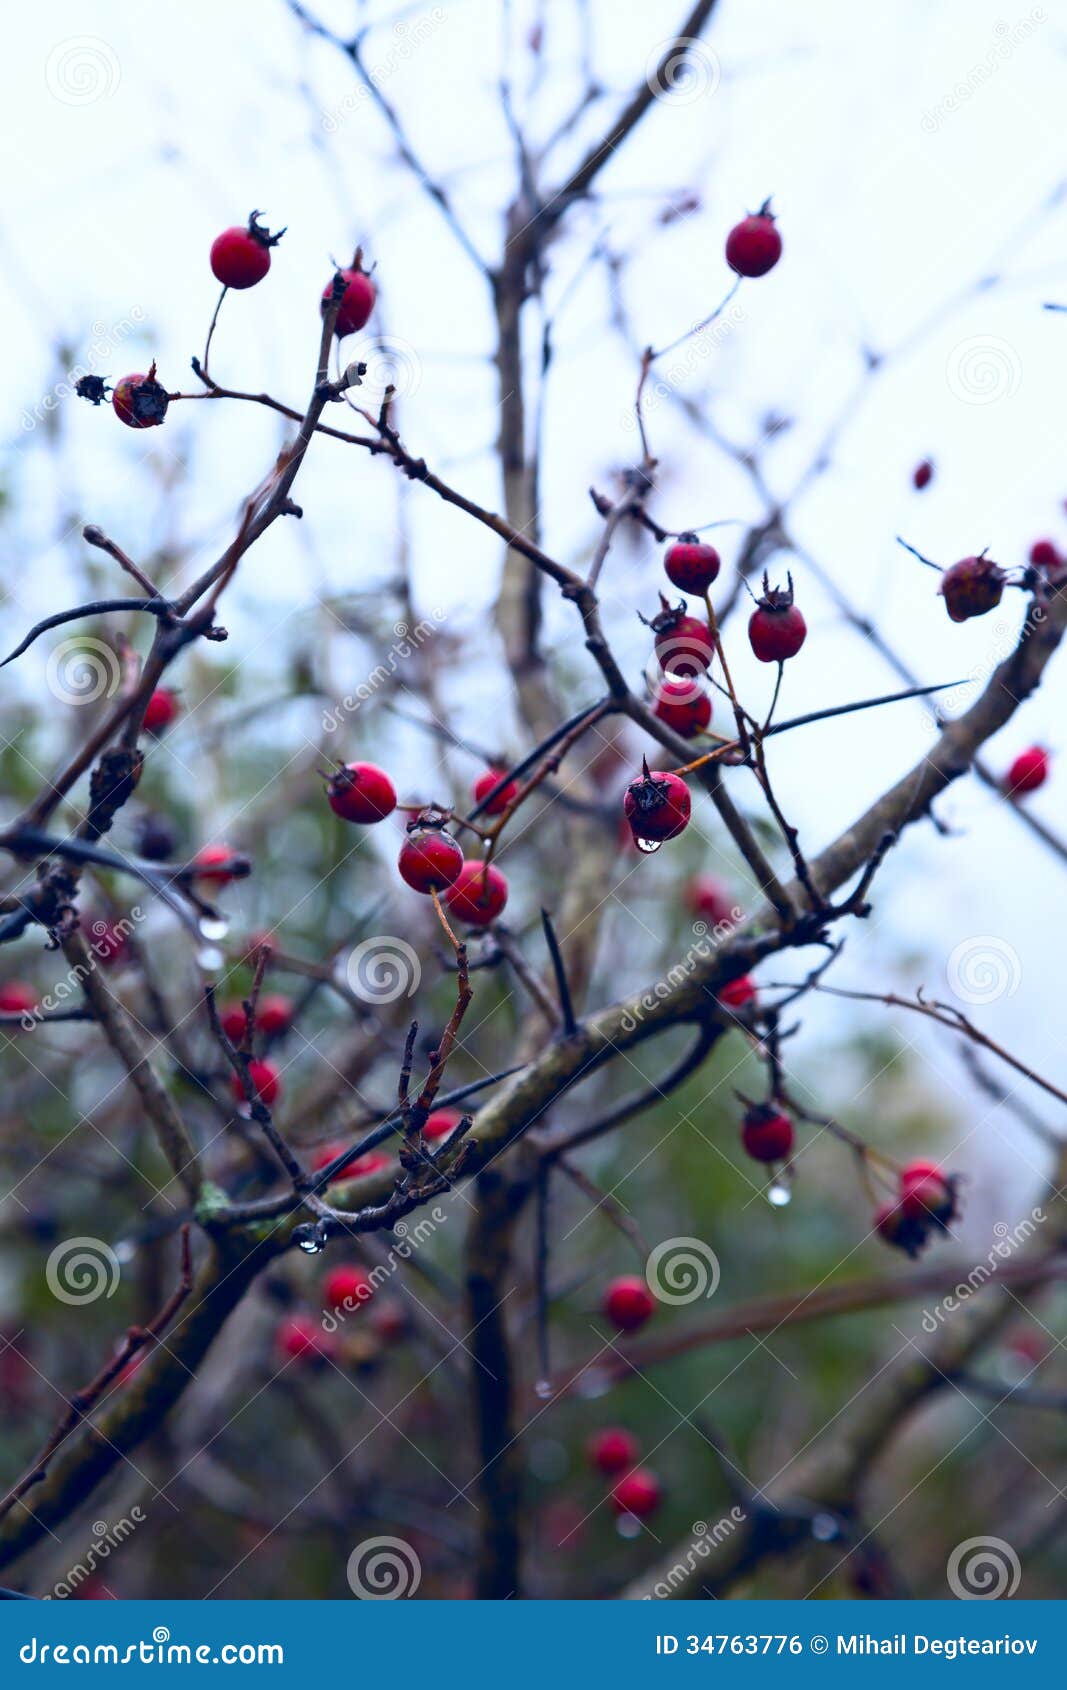 Briar Berry Royalty Free Stock Image - Image: 34763776